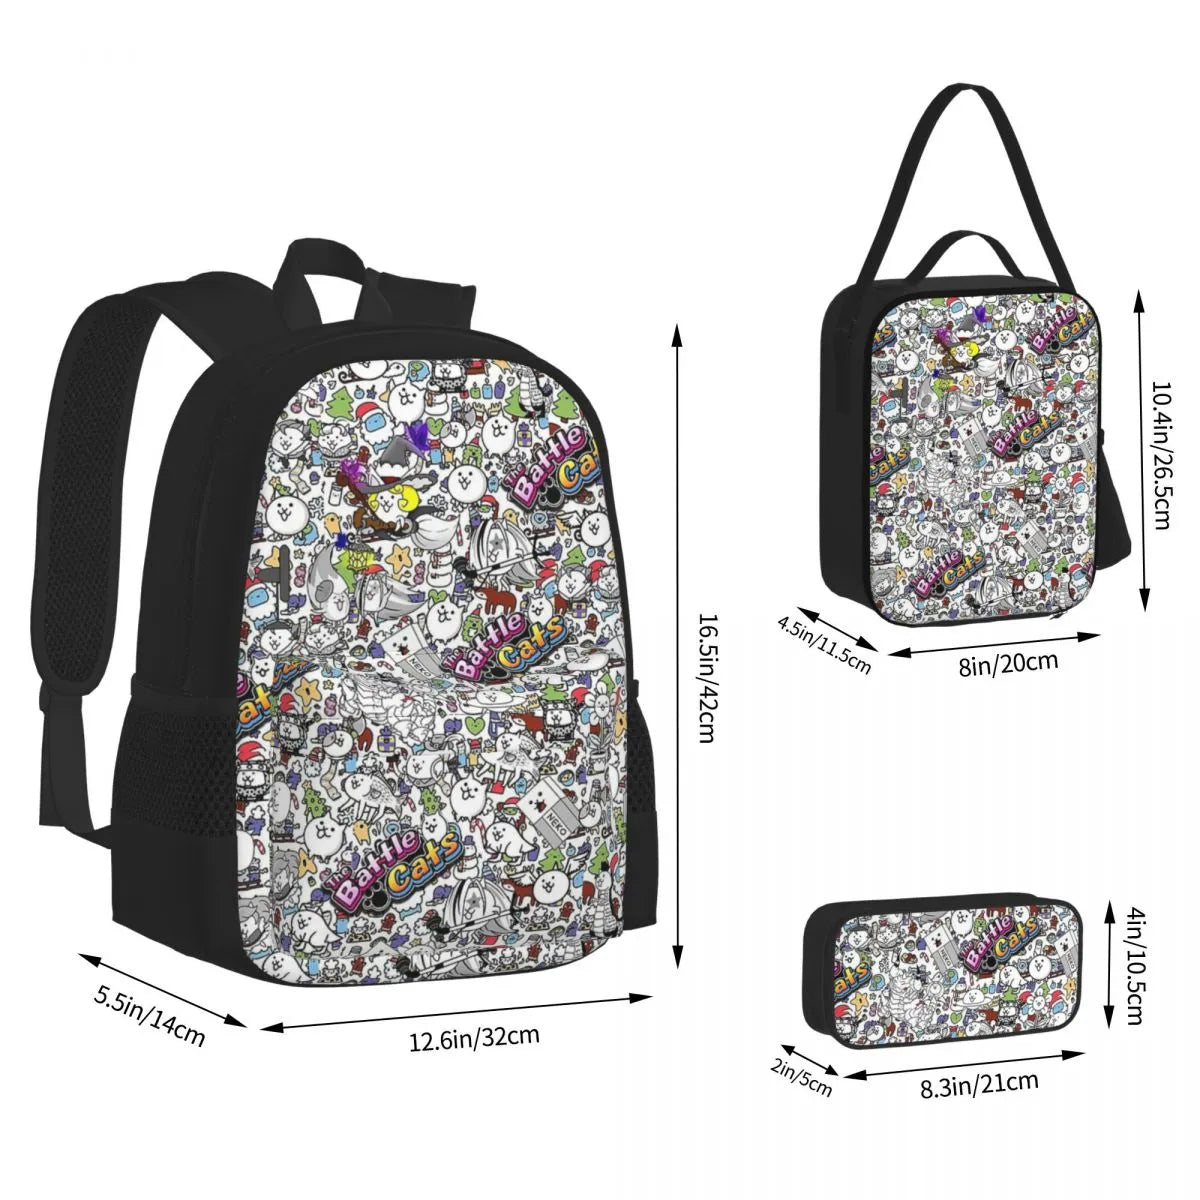 Adventure Awaits with Cat Battle Children's School Bags Pencil case and lunch bag 3 in 1 - Let the Fun Begin! - Nekoby Adventure Awaits with Cat Battle Children's School Bags Pencil case and lunch bag 3 in 1 - Let the Fun Begin!